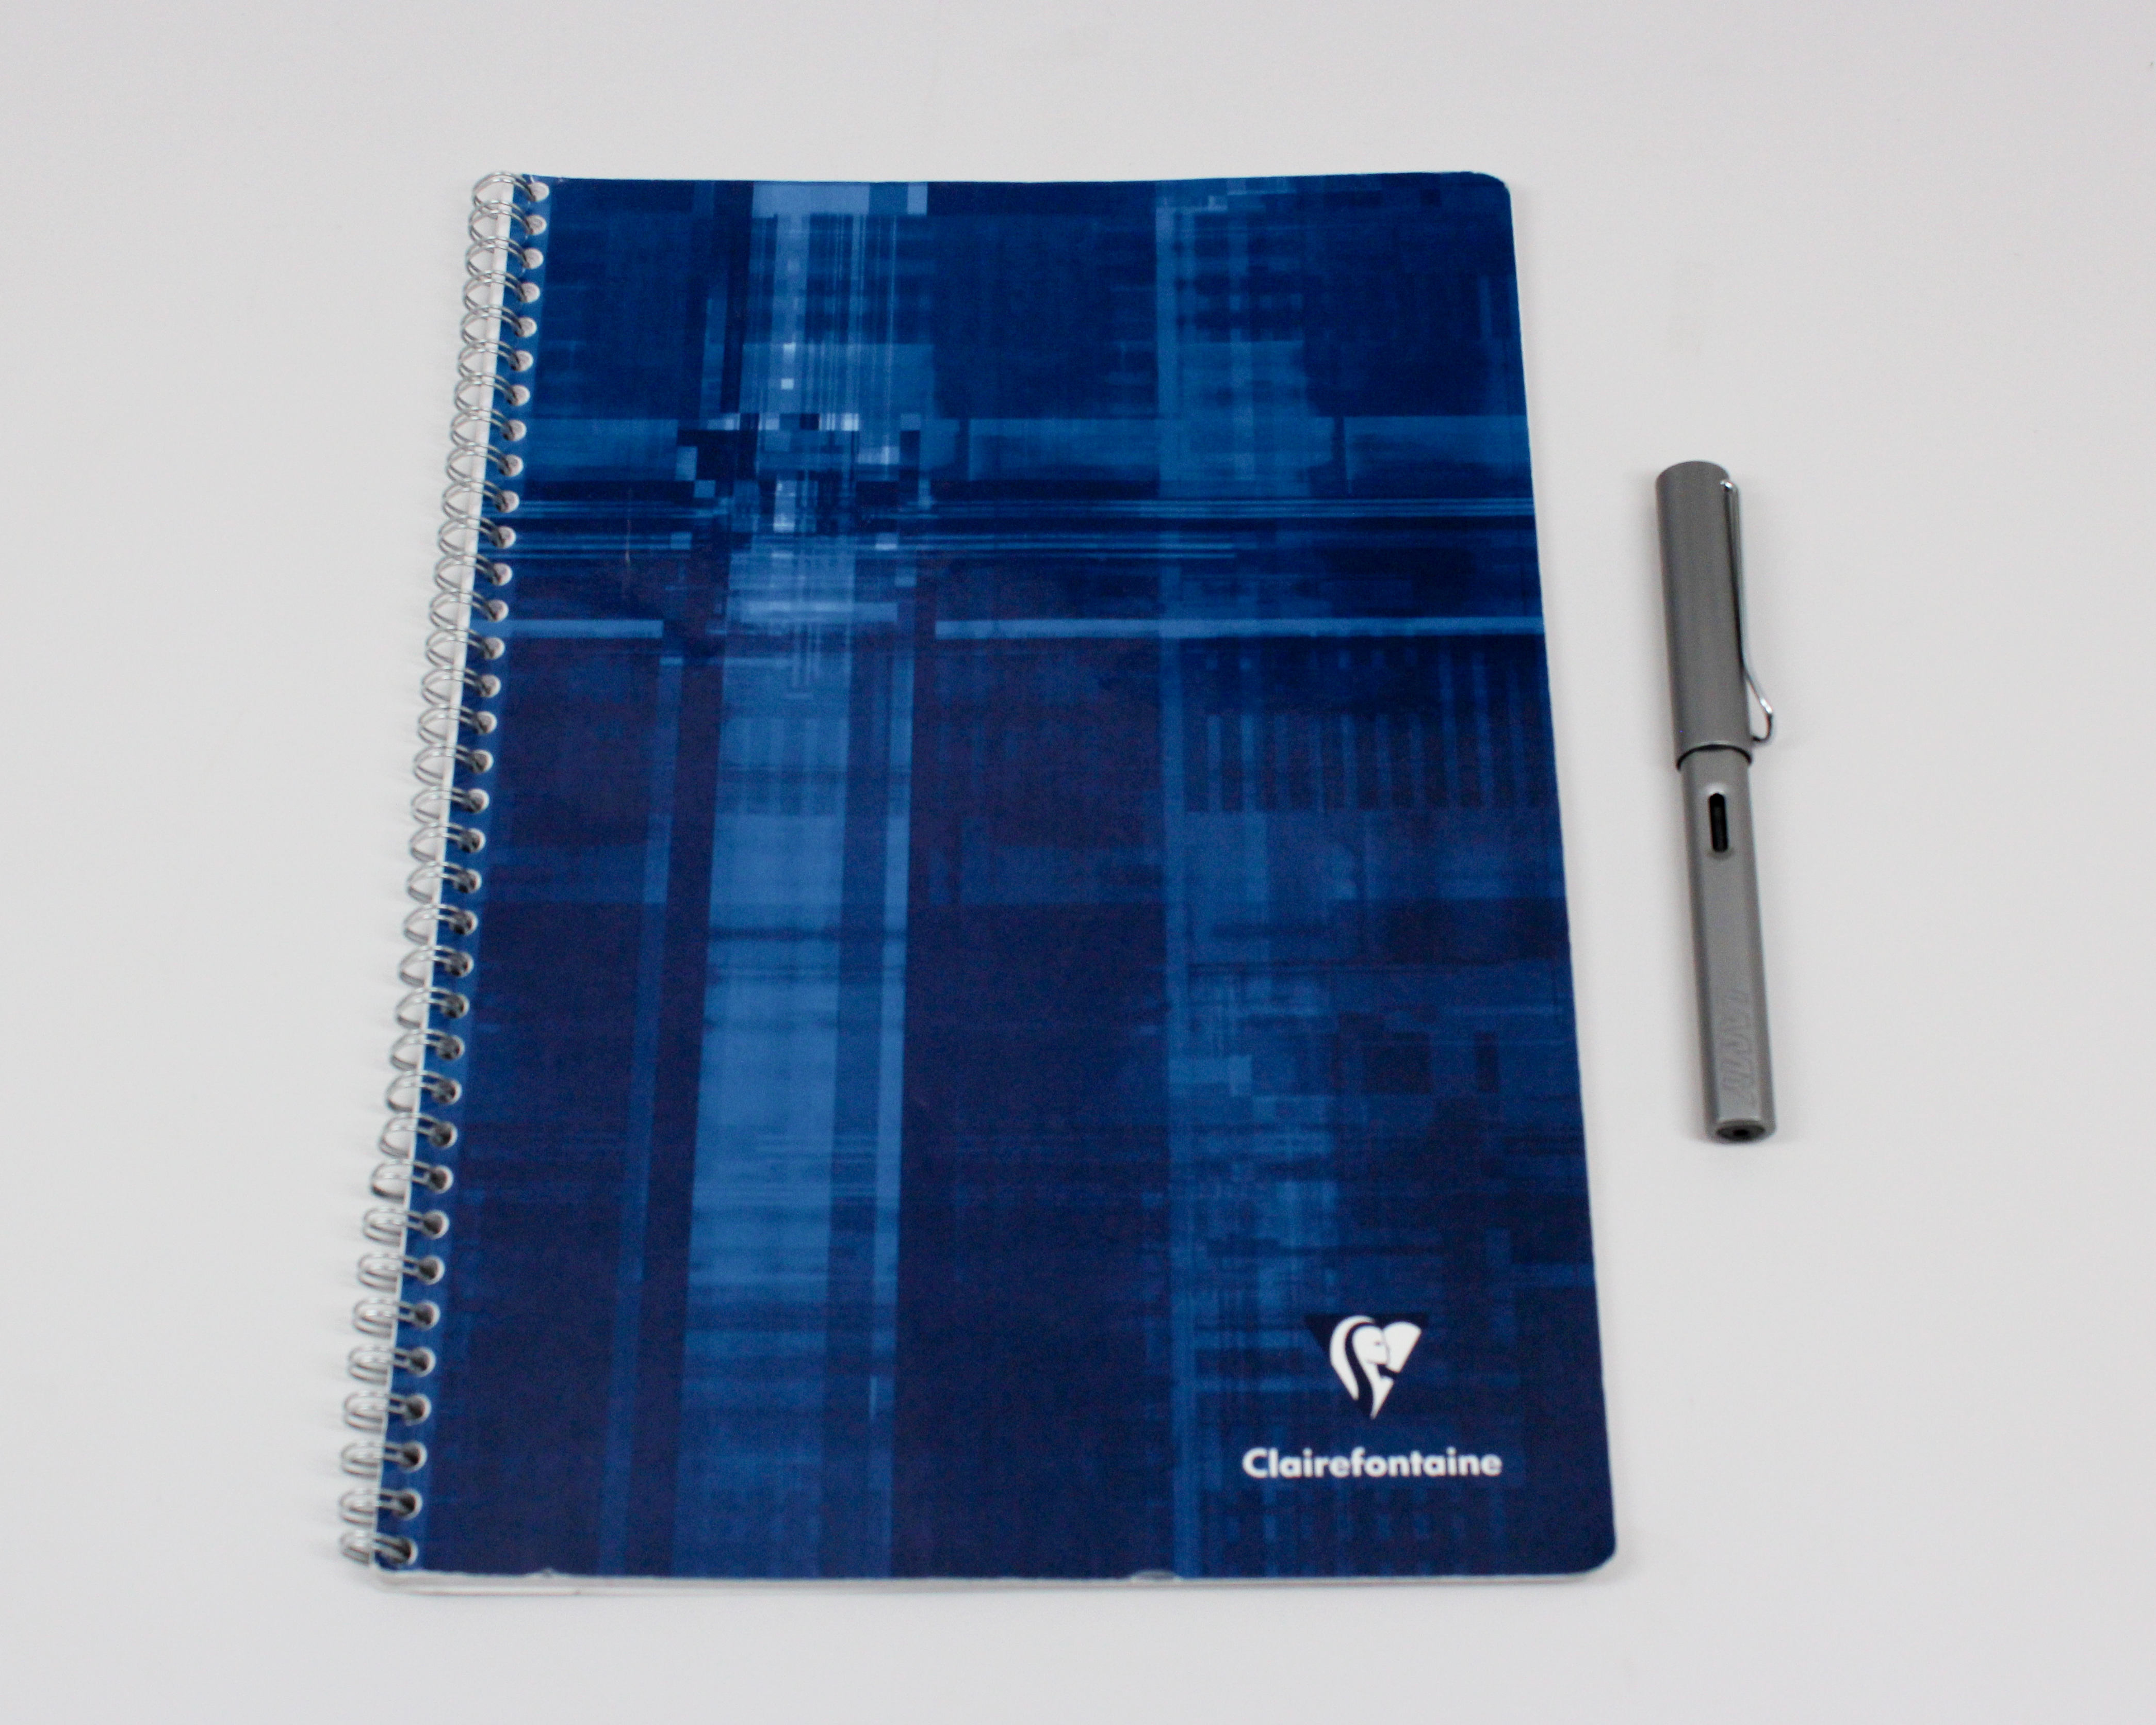 Clairefontaine Classic Notebook – Handwritten Review